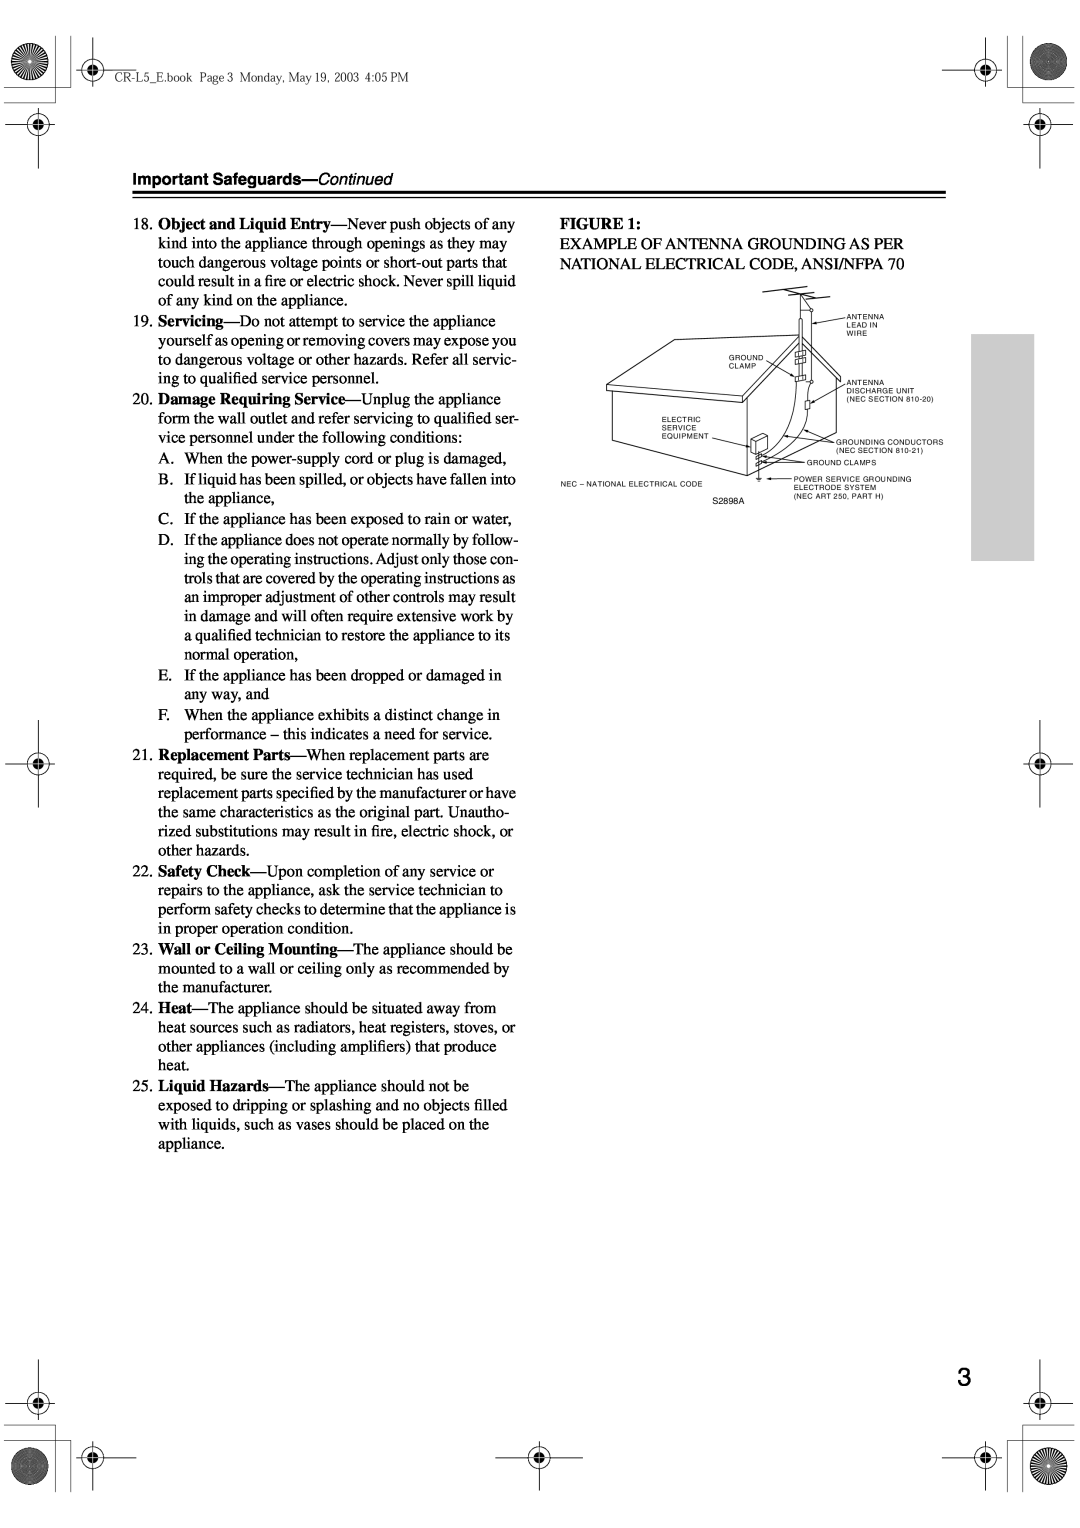 Onkyo CR-L5 instruction manual Important Safeguards-Continued, Damage Requiring Service-Unplugthe appliance 